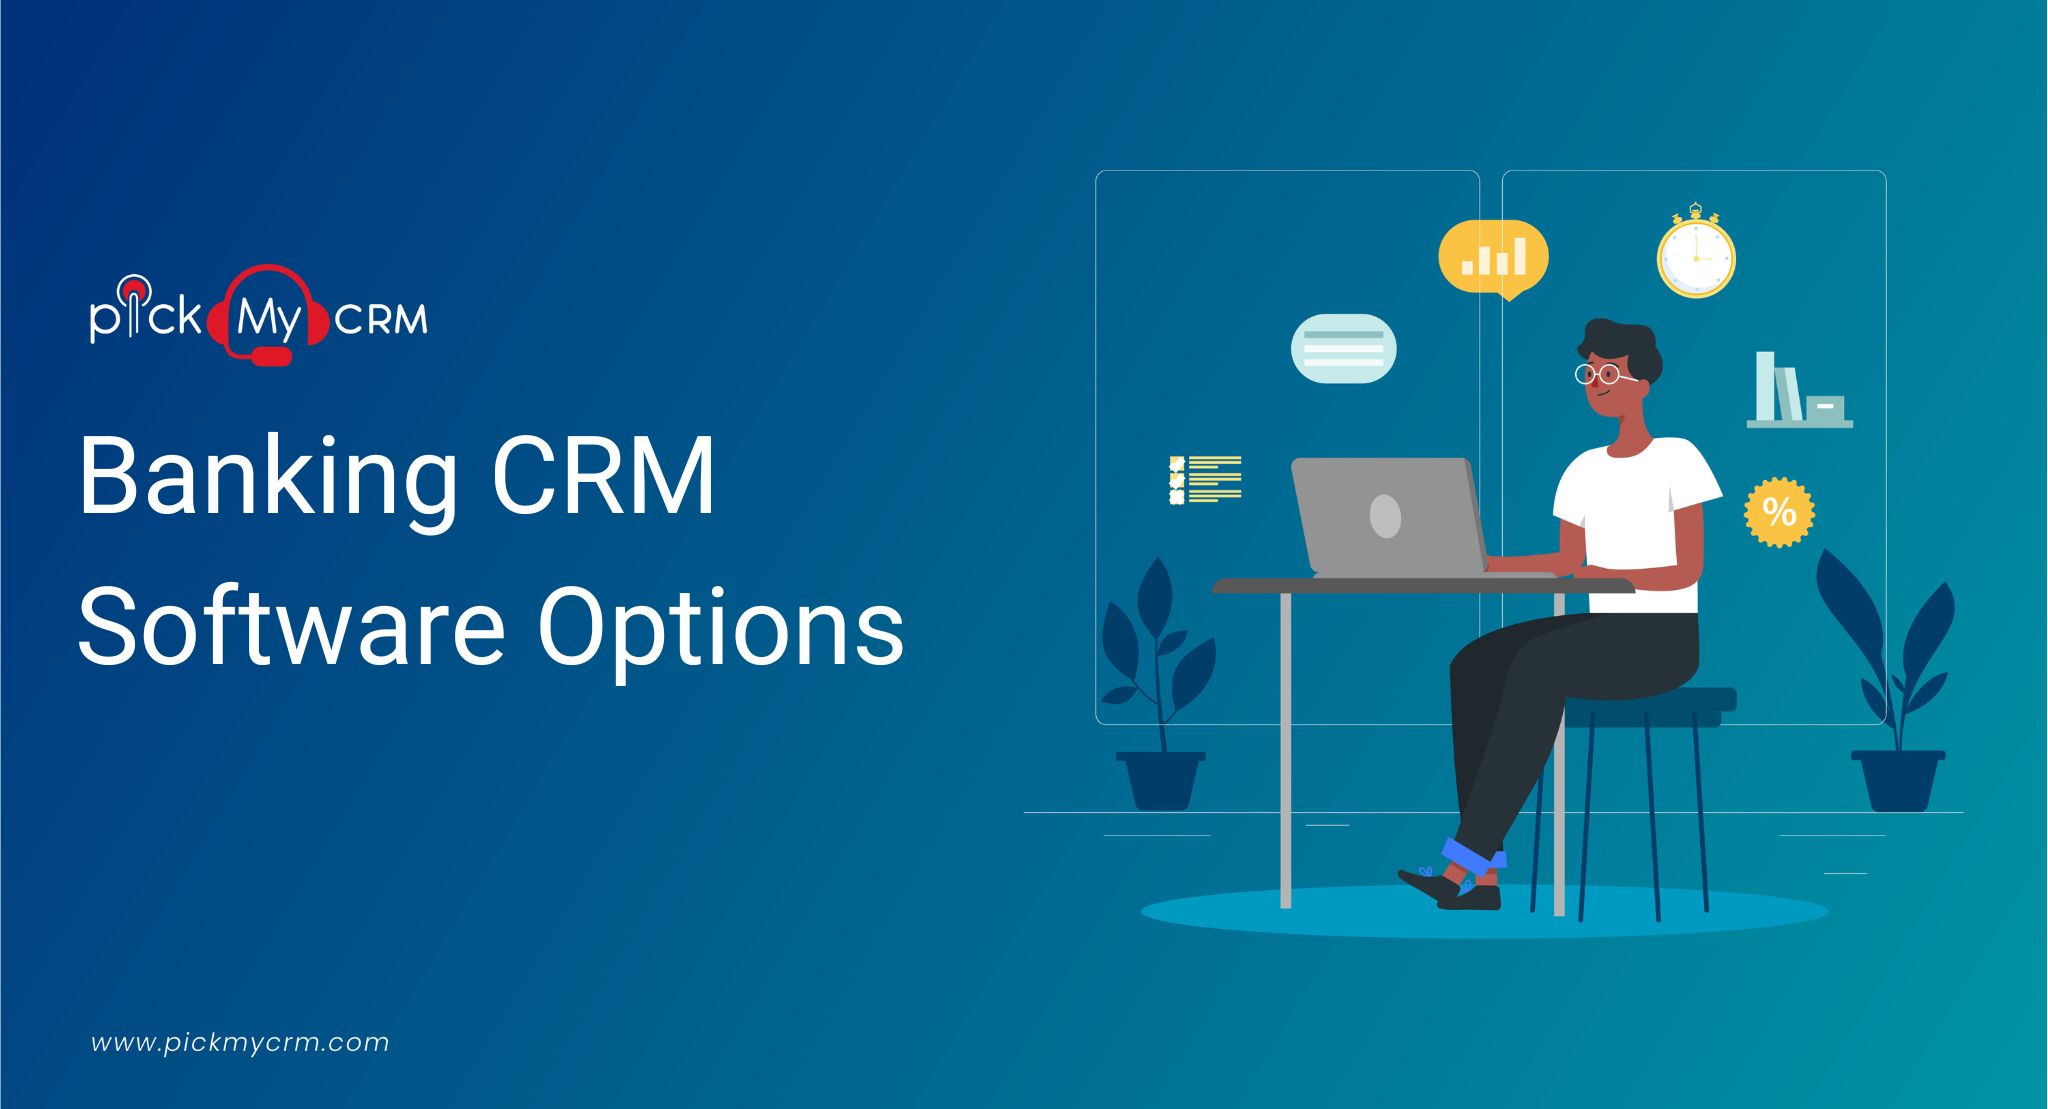 Banking CRM Software Options